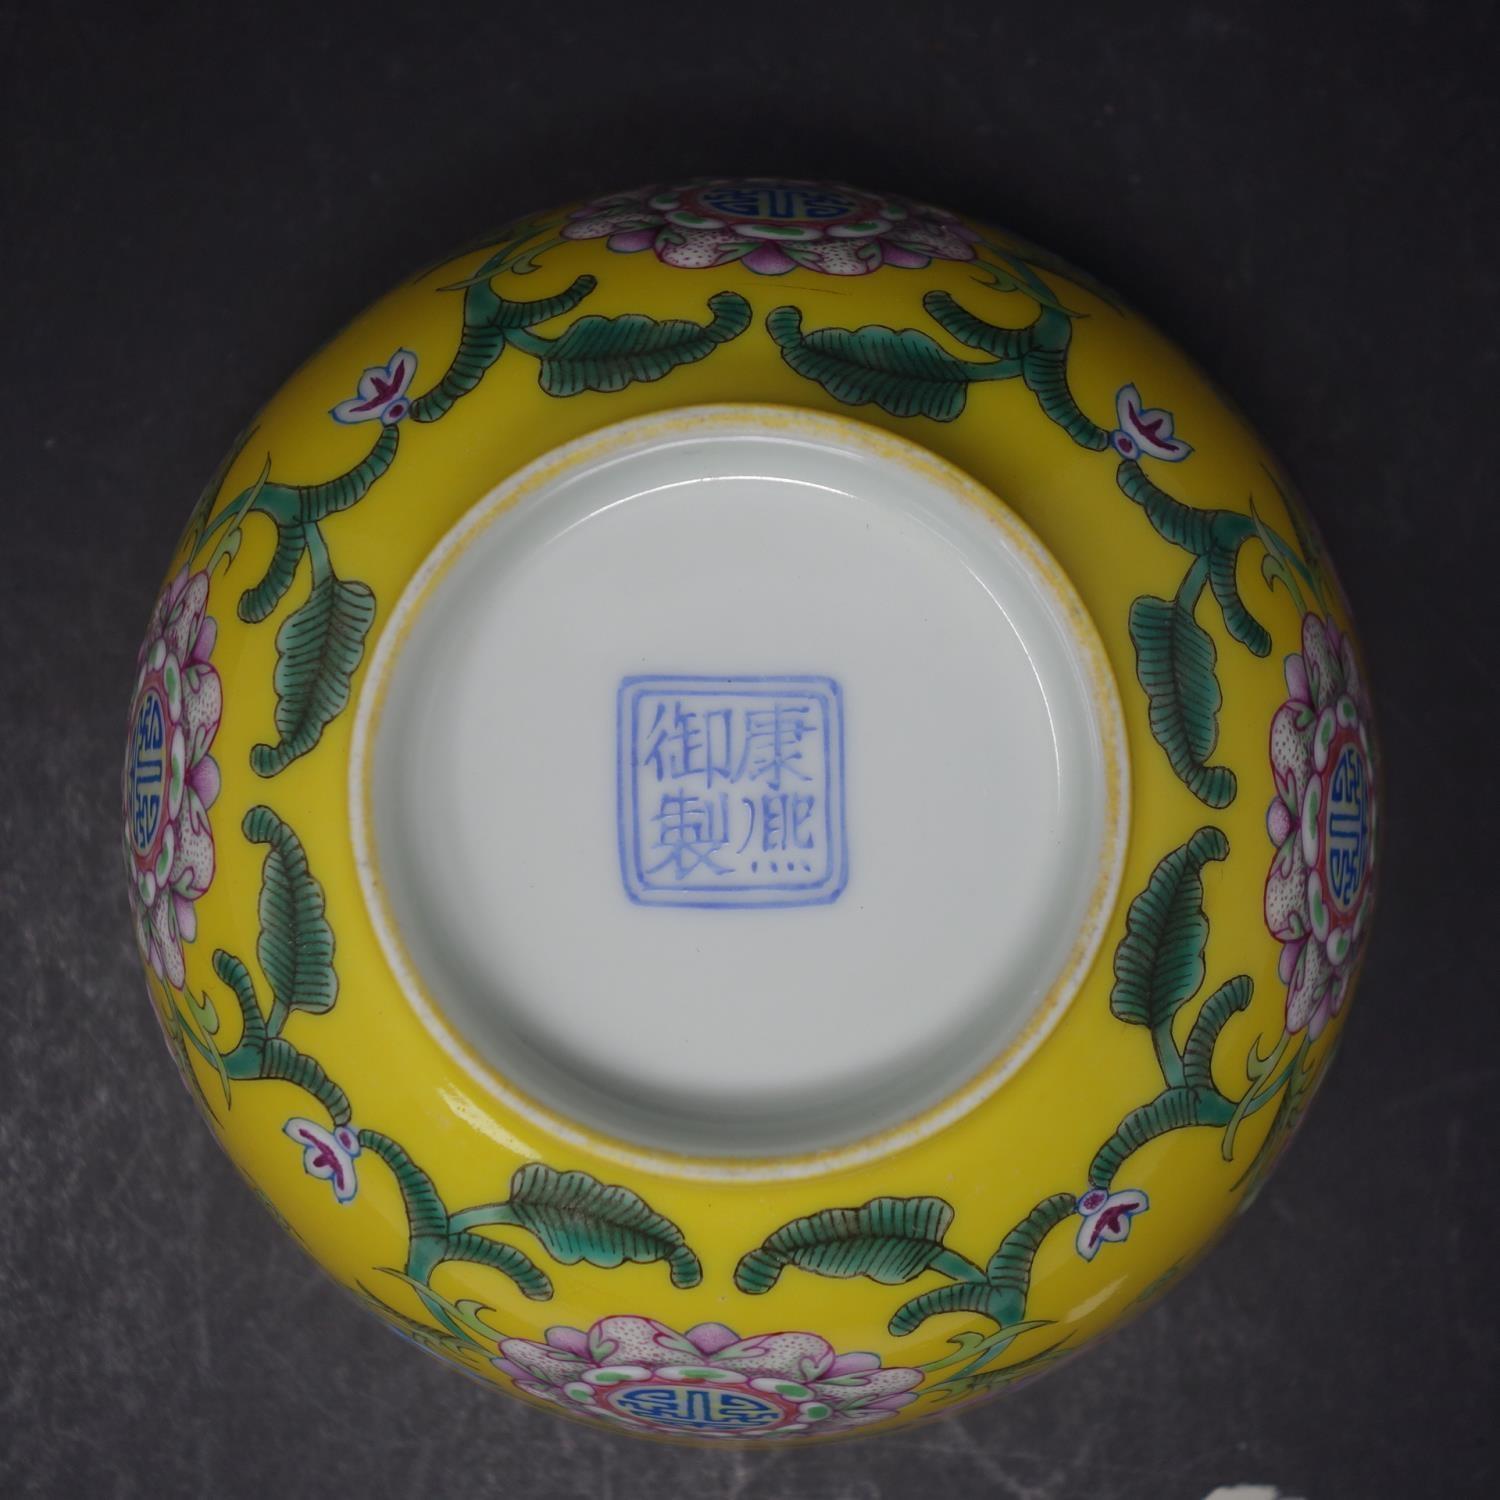 A Chinese imperial yellow-ground falangcai ?floral? bowl, 19 century, diam. 15 cm - Image 3 of 3